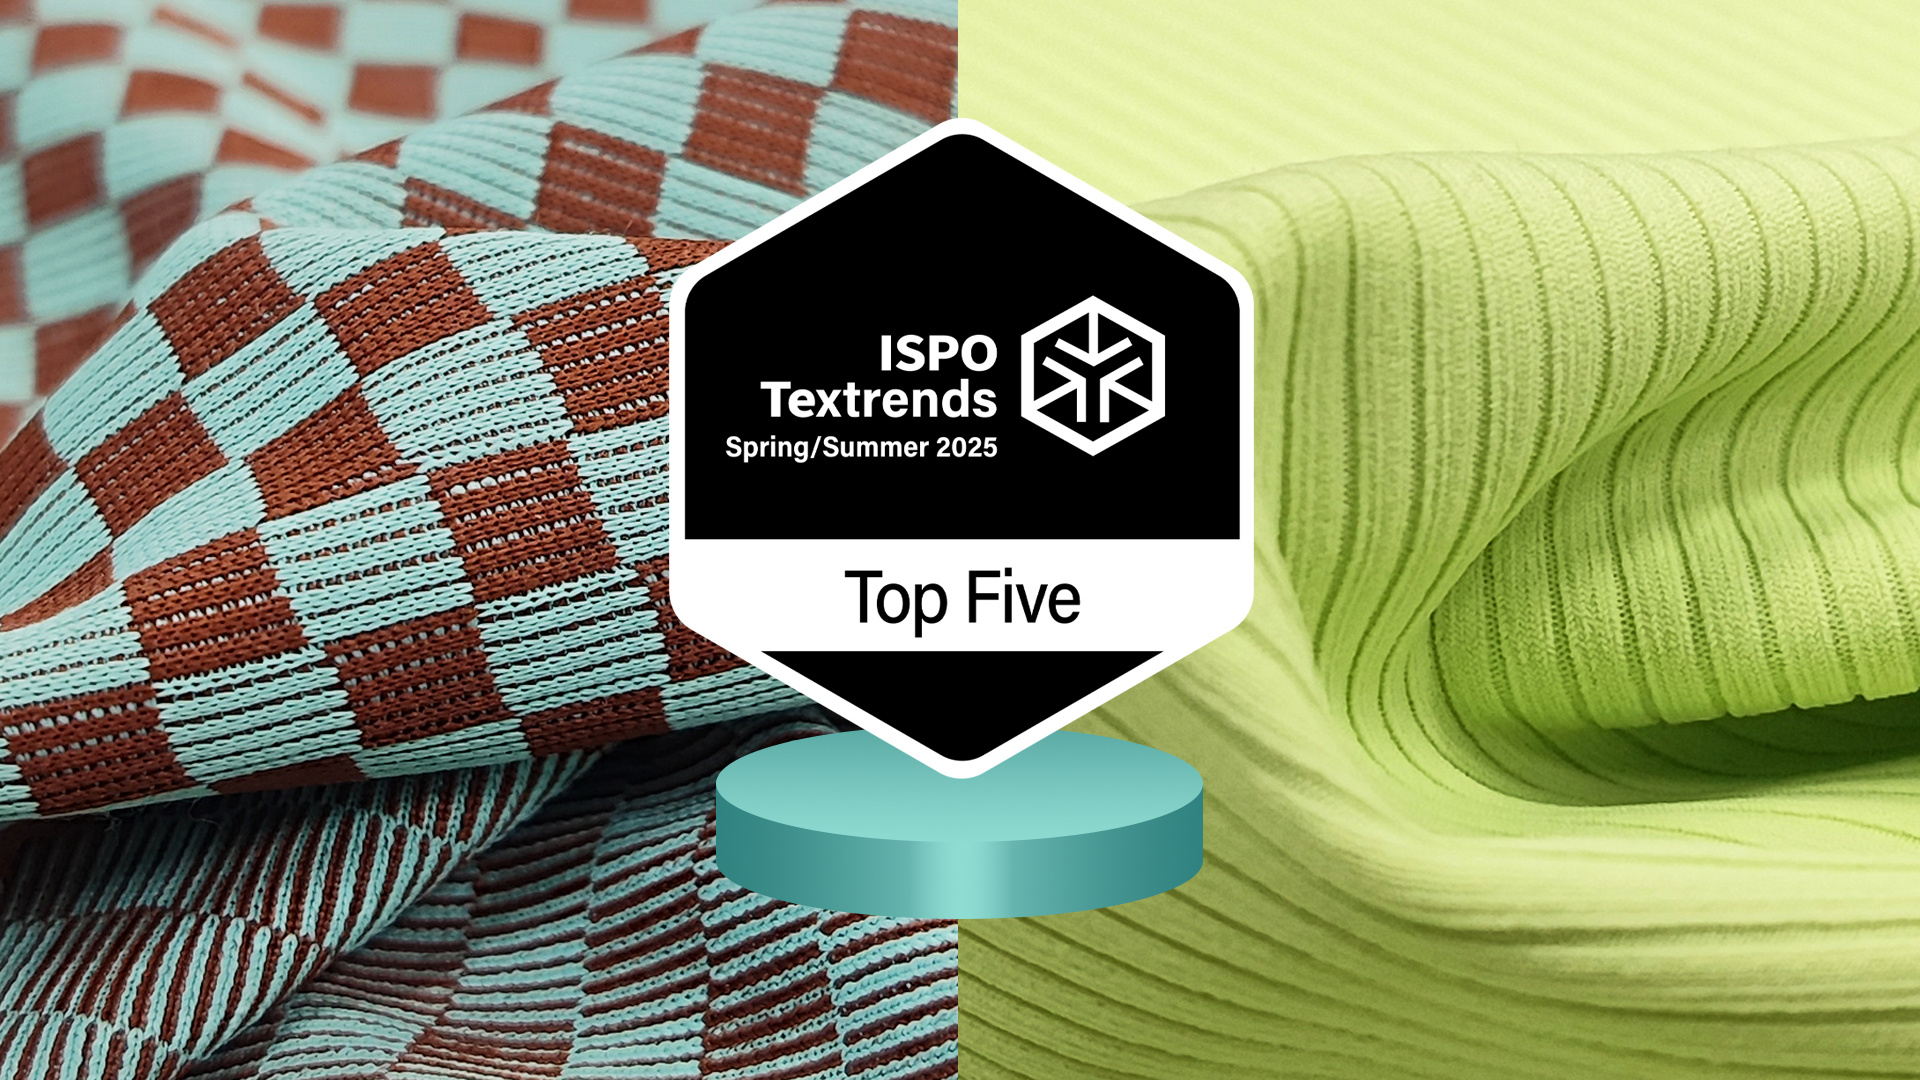 ISPO Textrends - Top 5